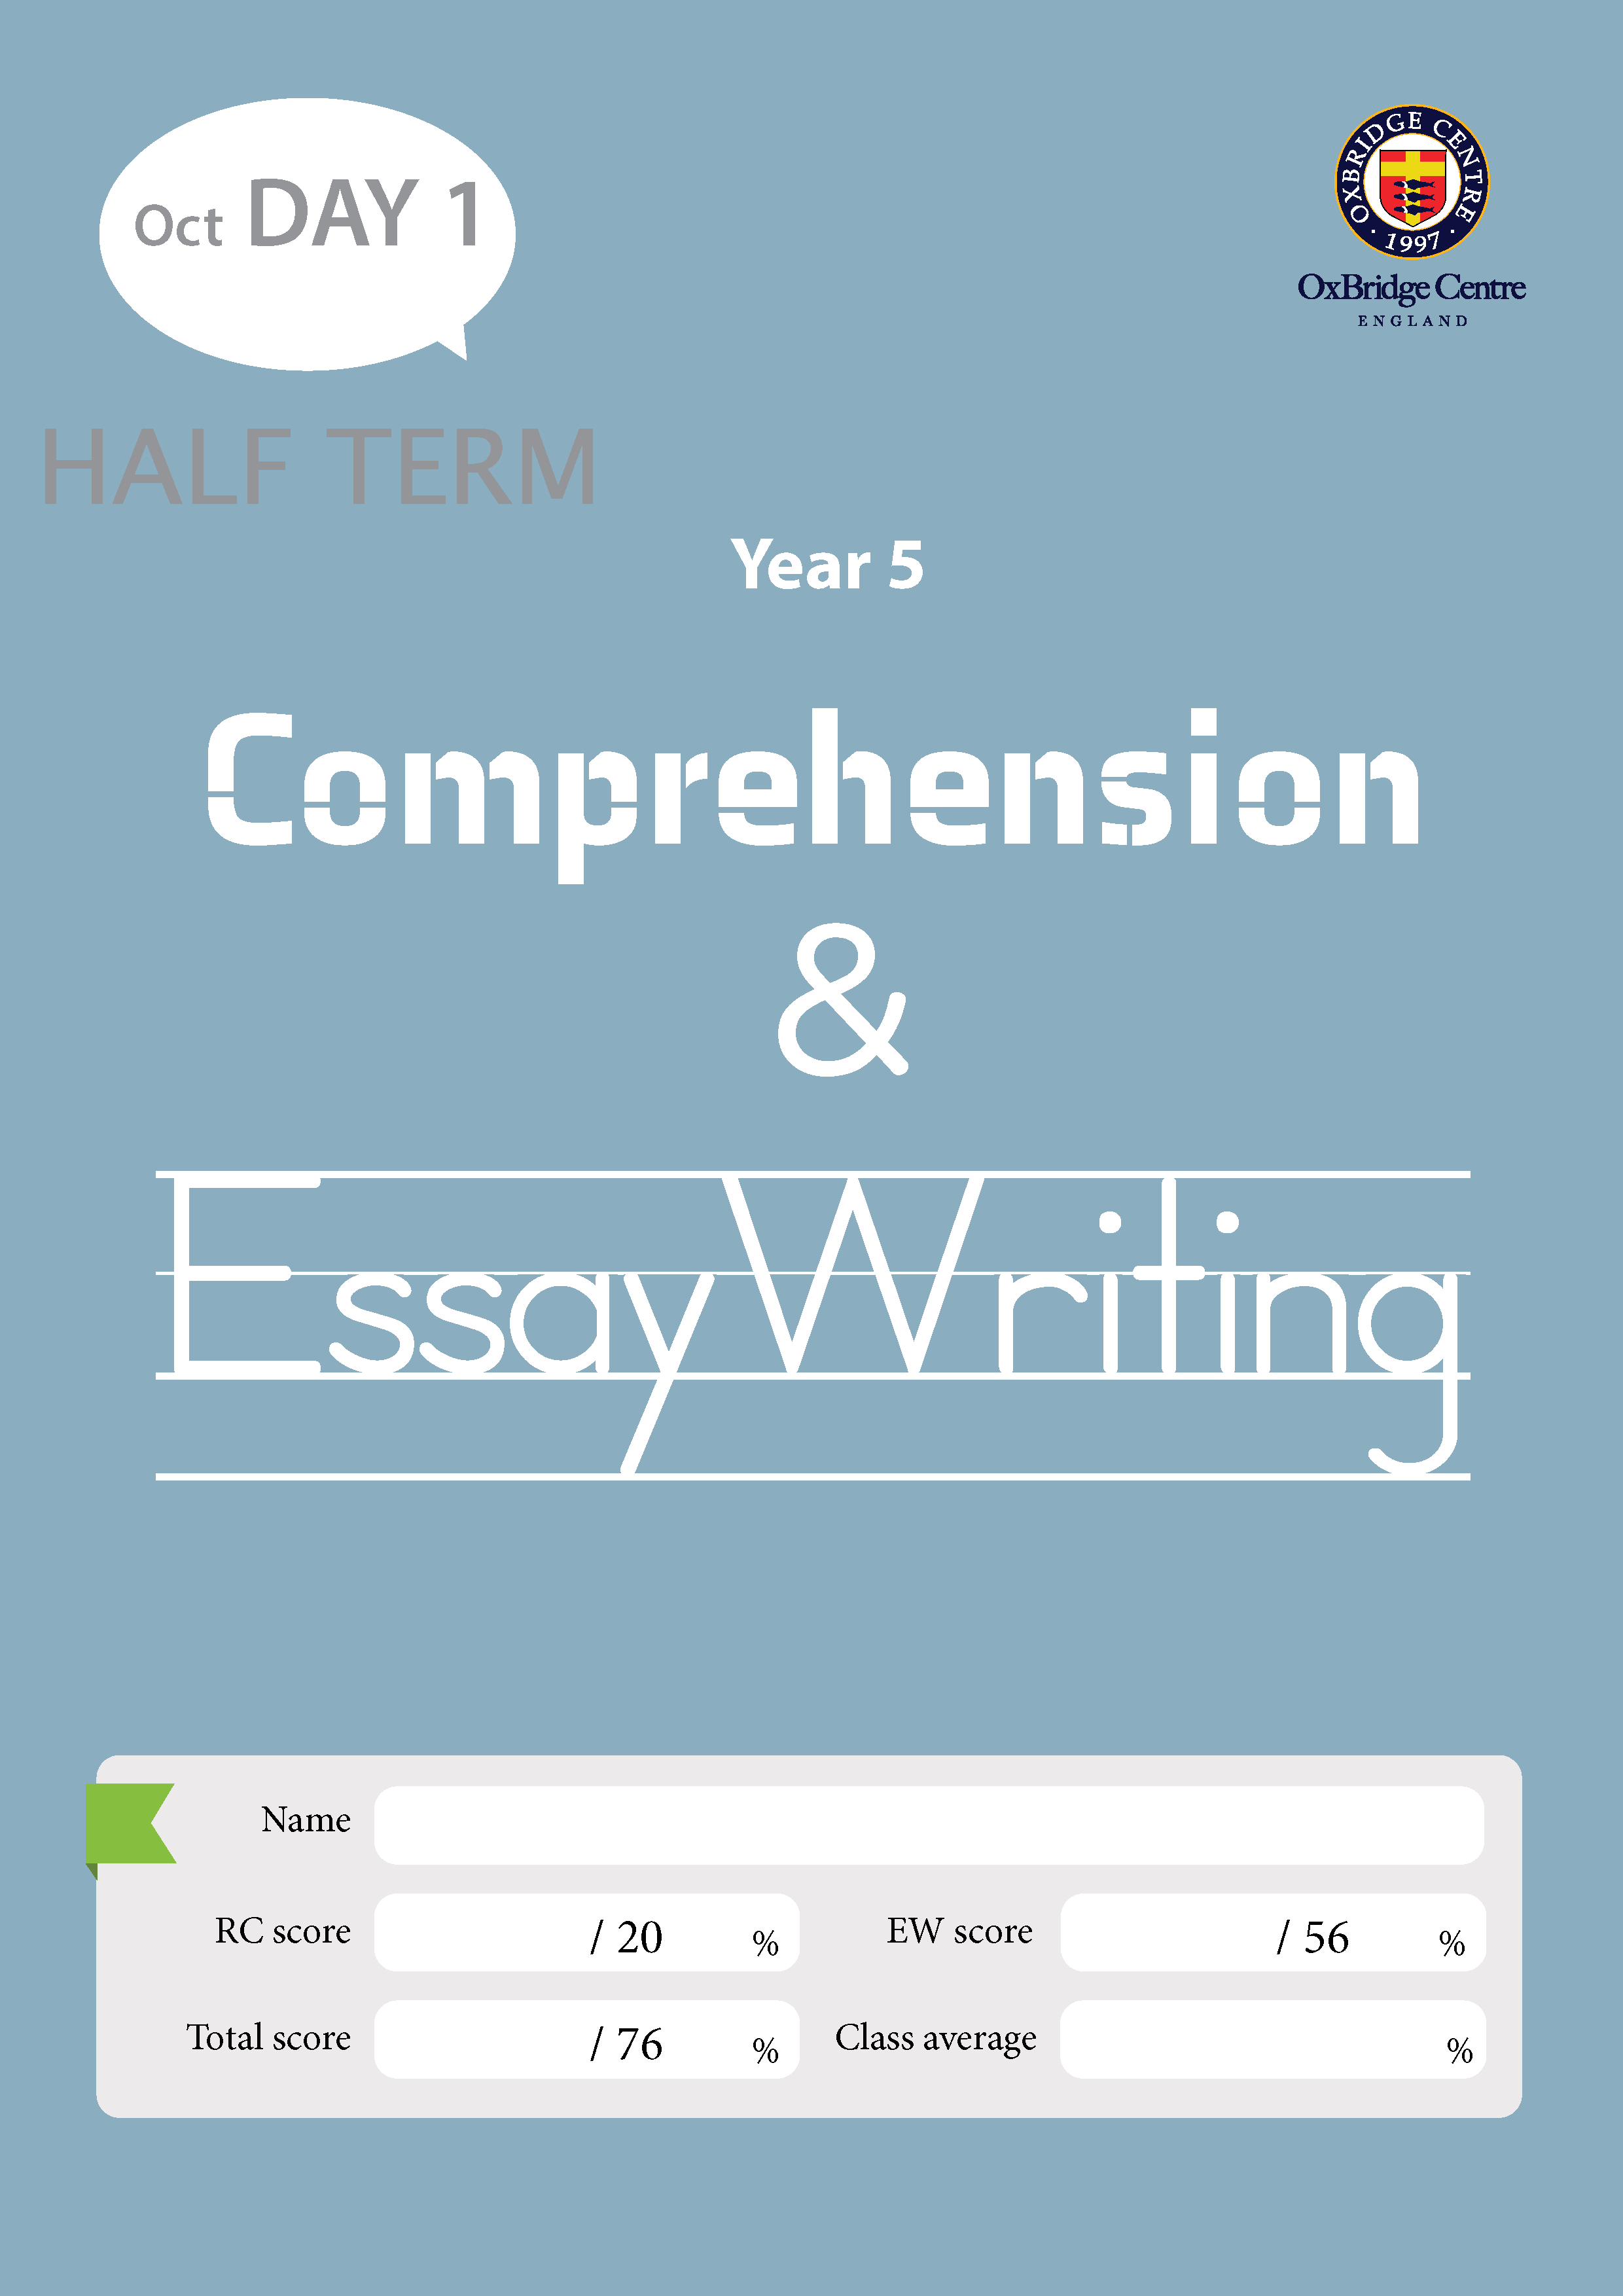 Year 4 Essay Writing booklet thumbnail